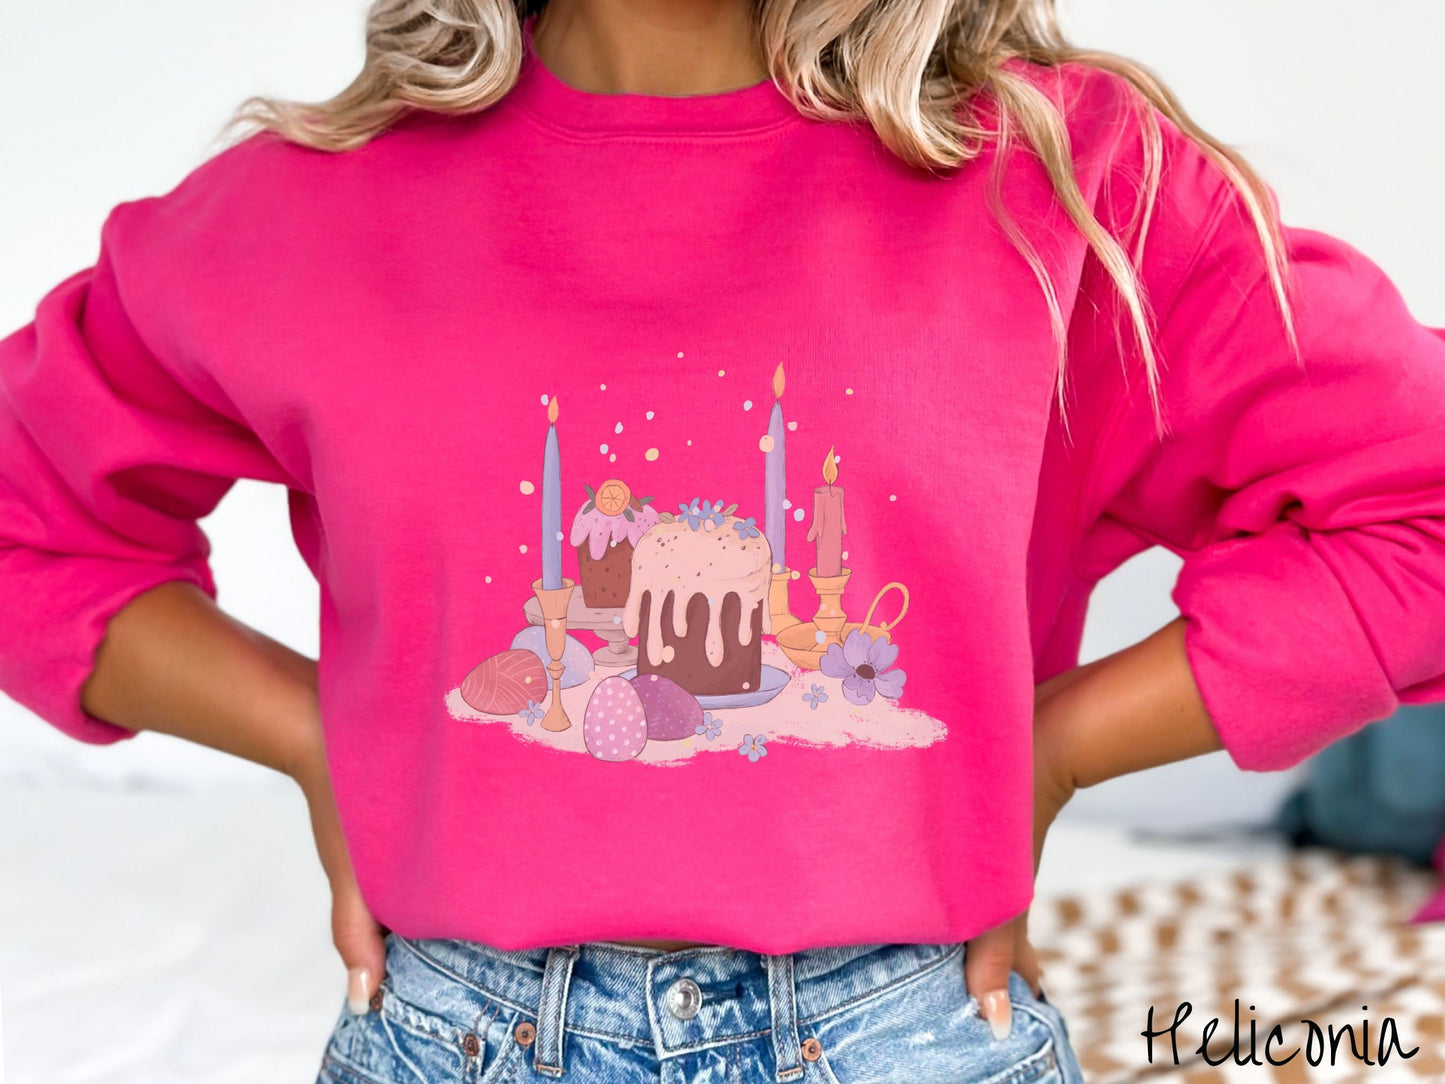 A woman wearing a cute, vintage heliconia colored sweatshirt with an assortment of colorful candles with wax running down the sides in the center, scattered around the candles are pink, purple, red, and blue colored Easter eggs.